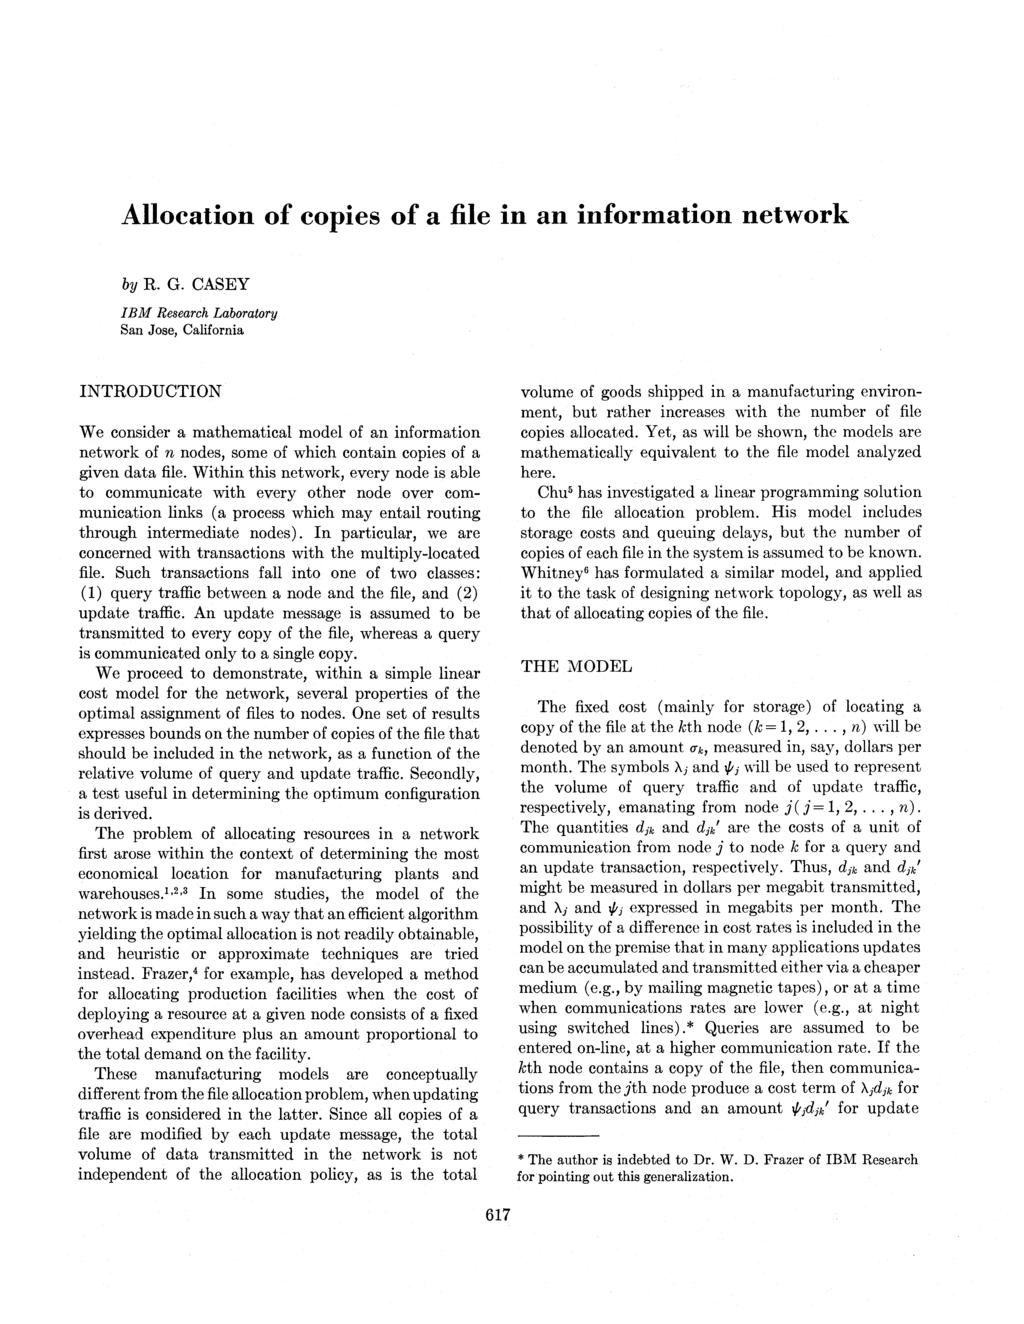 Allocatio of copies of a file i a iformatio etwork by R. G.